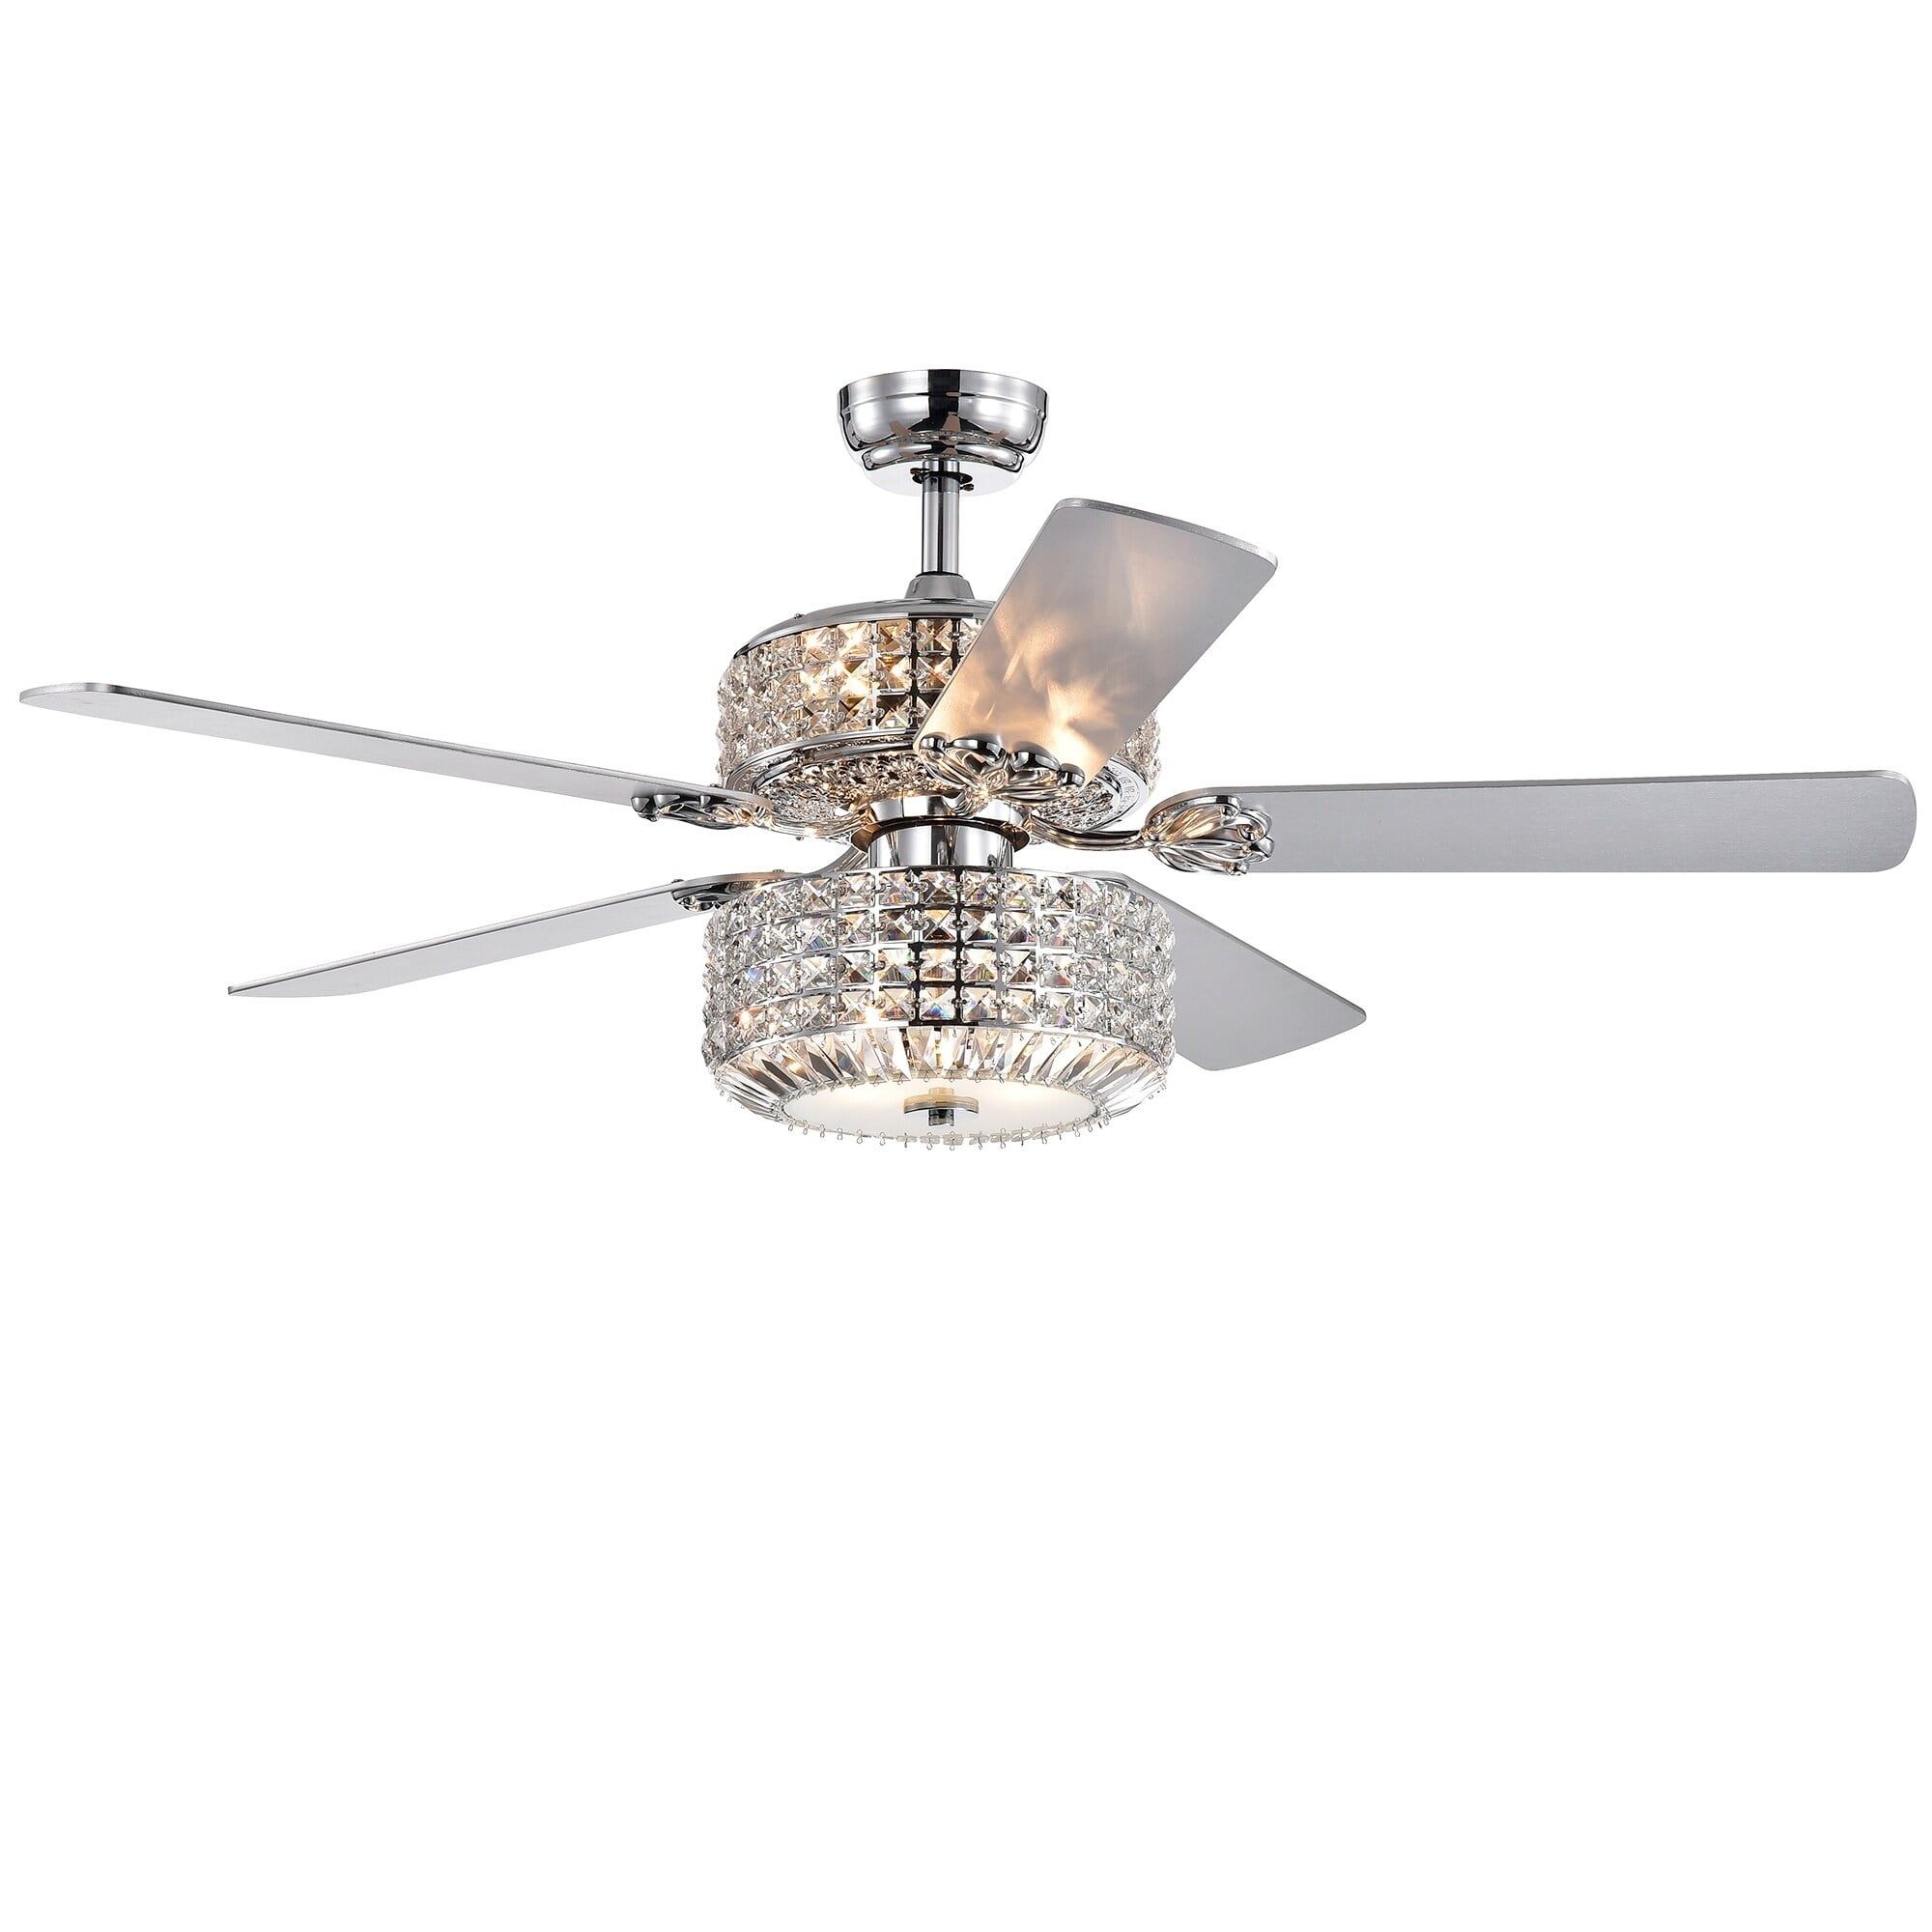 Walter Dual Lamp Chrome 52-inch Lighted Ceiling Fan w Crystal Shades optional Remote (incl 2 Color Blade Options)